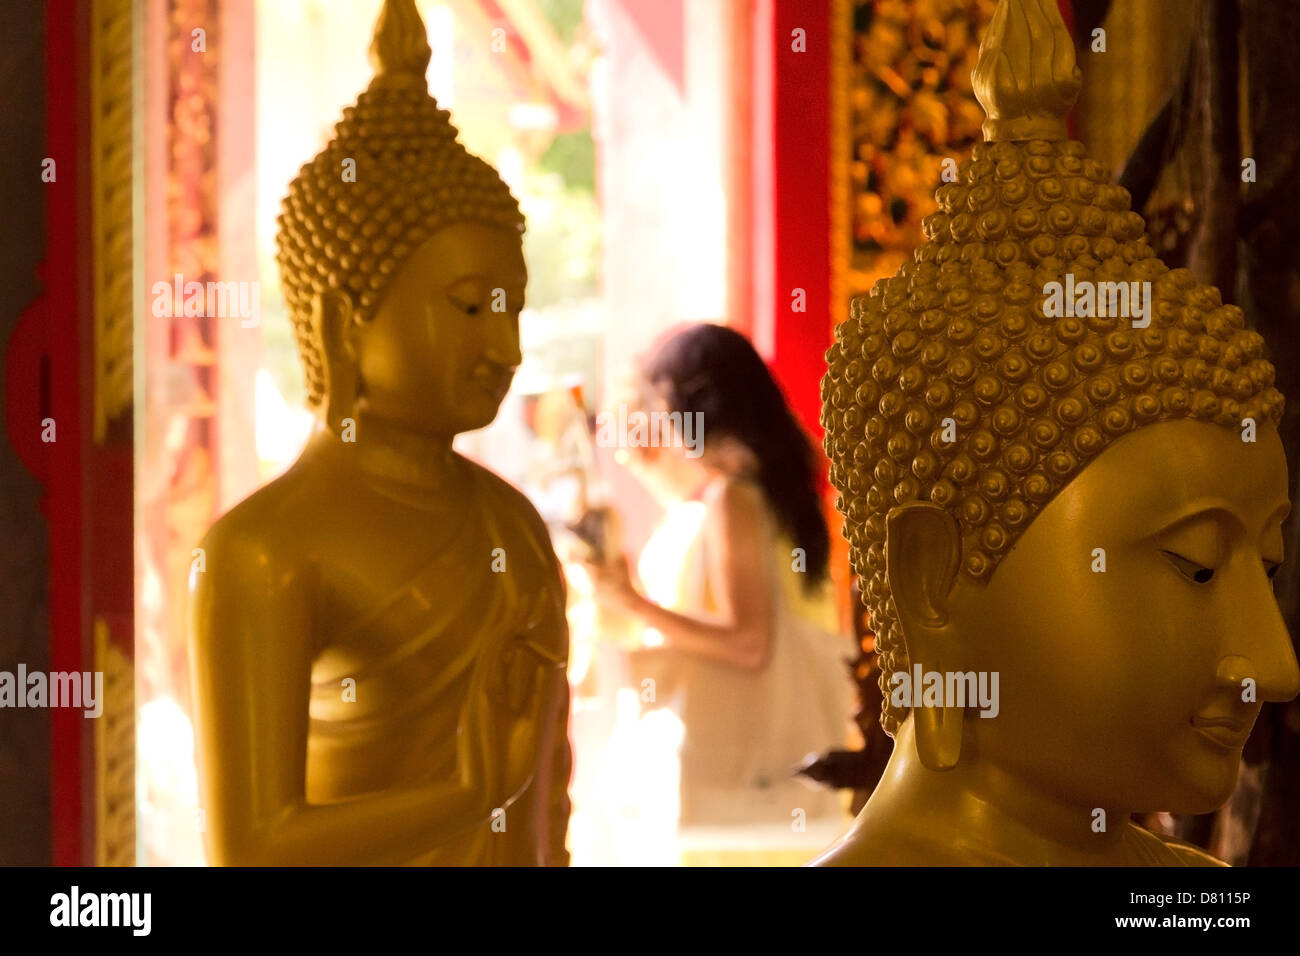 PHUKET, THAILAND APRIL 28 2013: AThai woman exits a temple building after a Wai Phra offering at Wat Chalong. Stock Photo